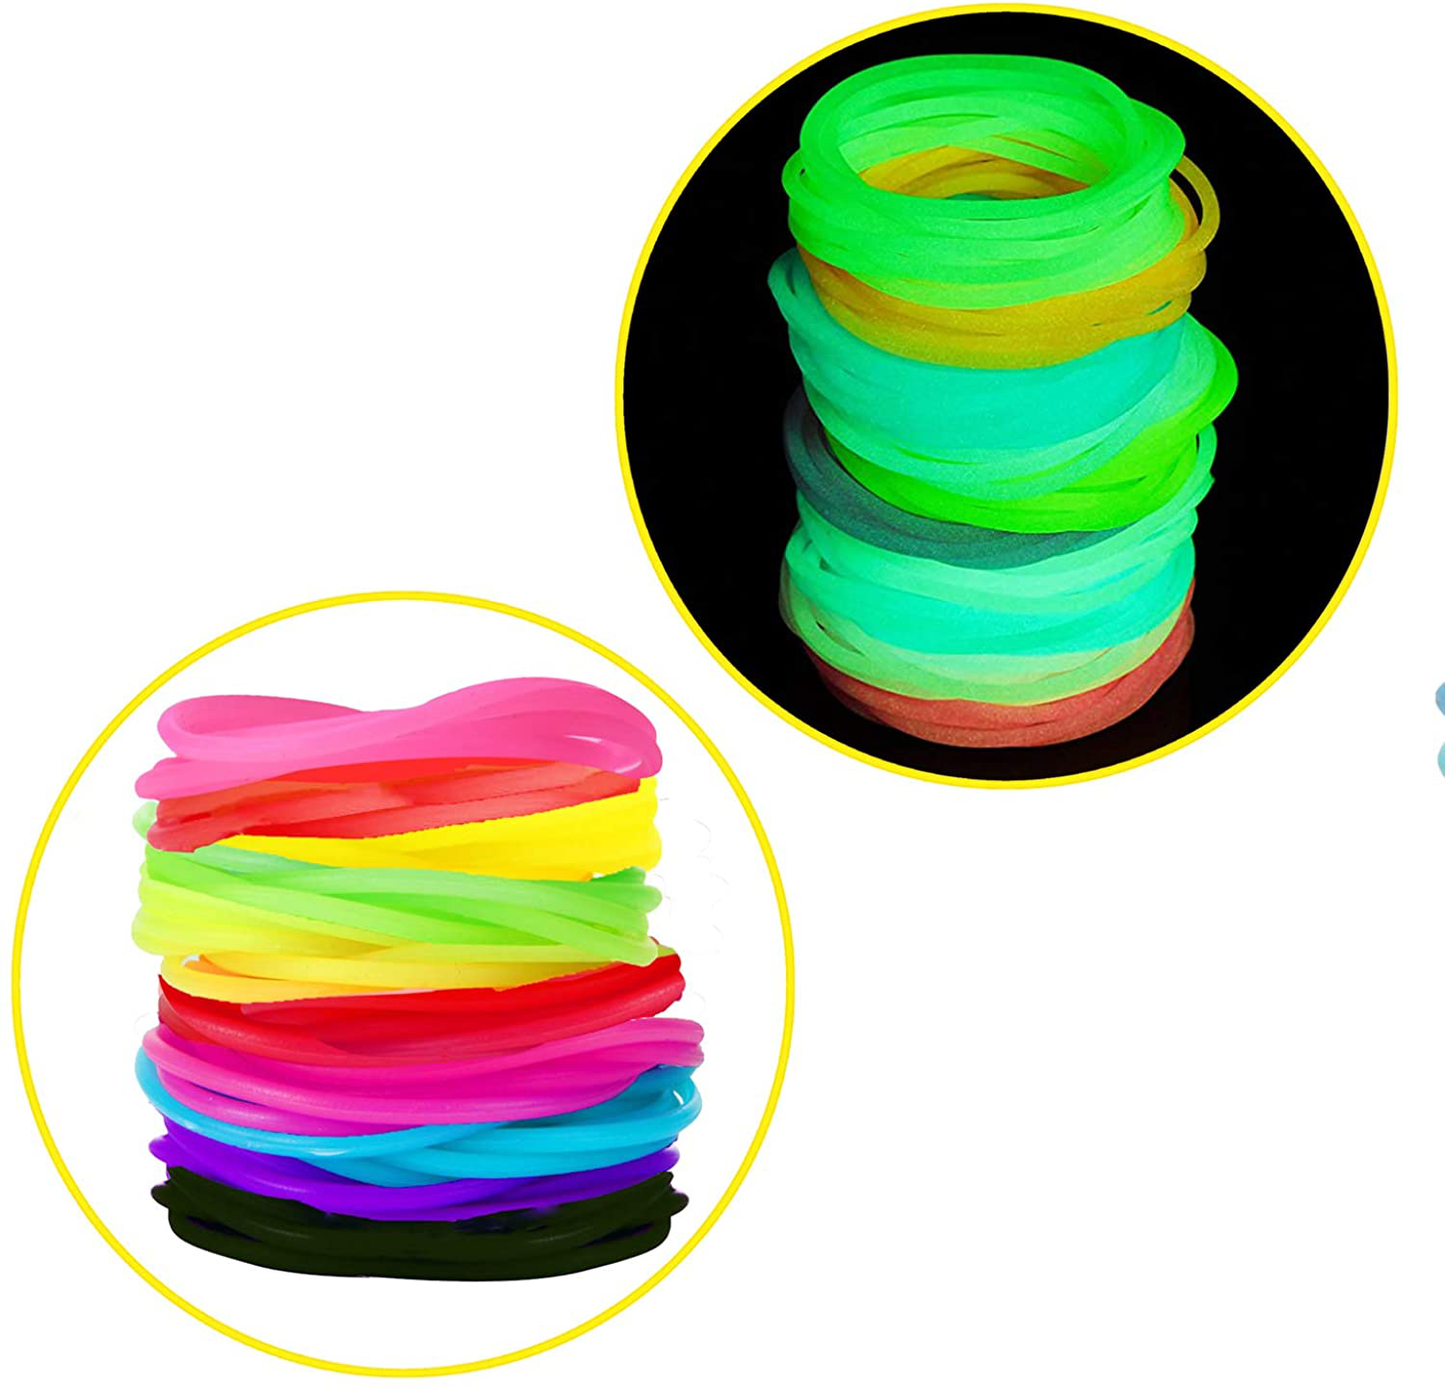 80’S Party Bracelets Rainbow 10 Colors Silicone Jelly Glow Wristbands Luminous Hair Ties for Christmas Party Favors, Adults, Women, Kids, Girls Gifts (30PCS)